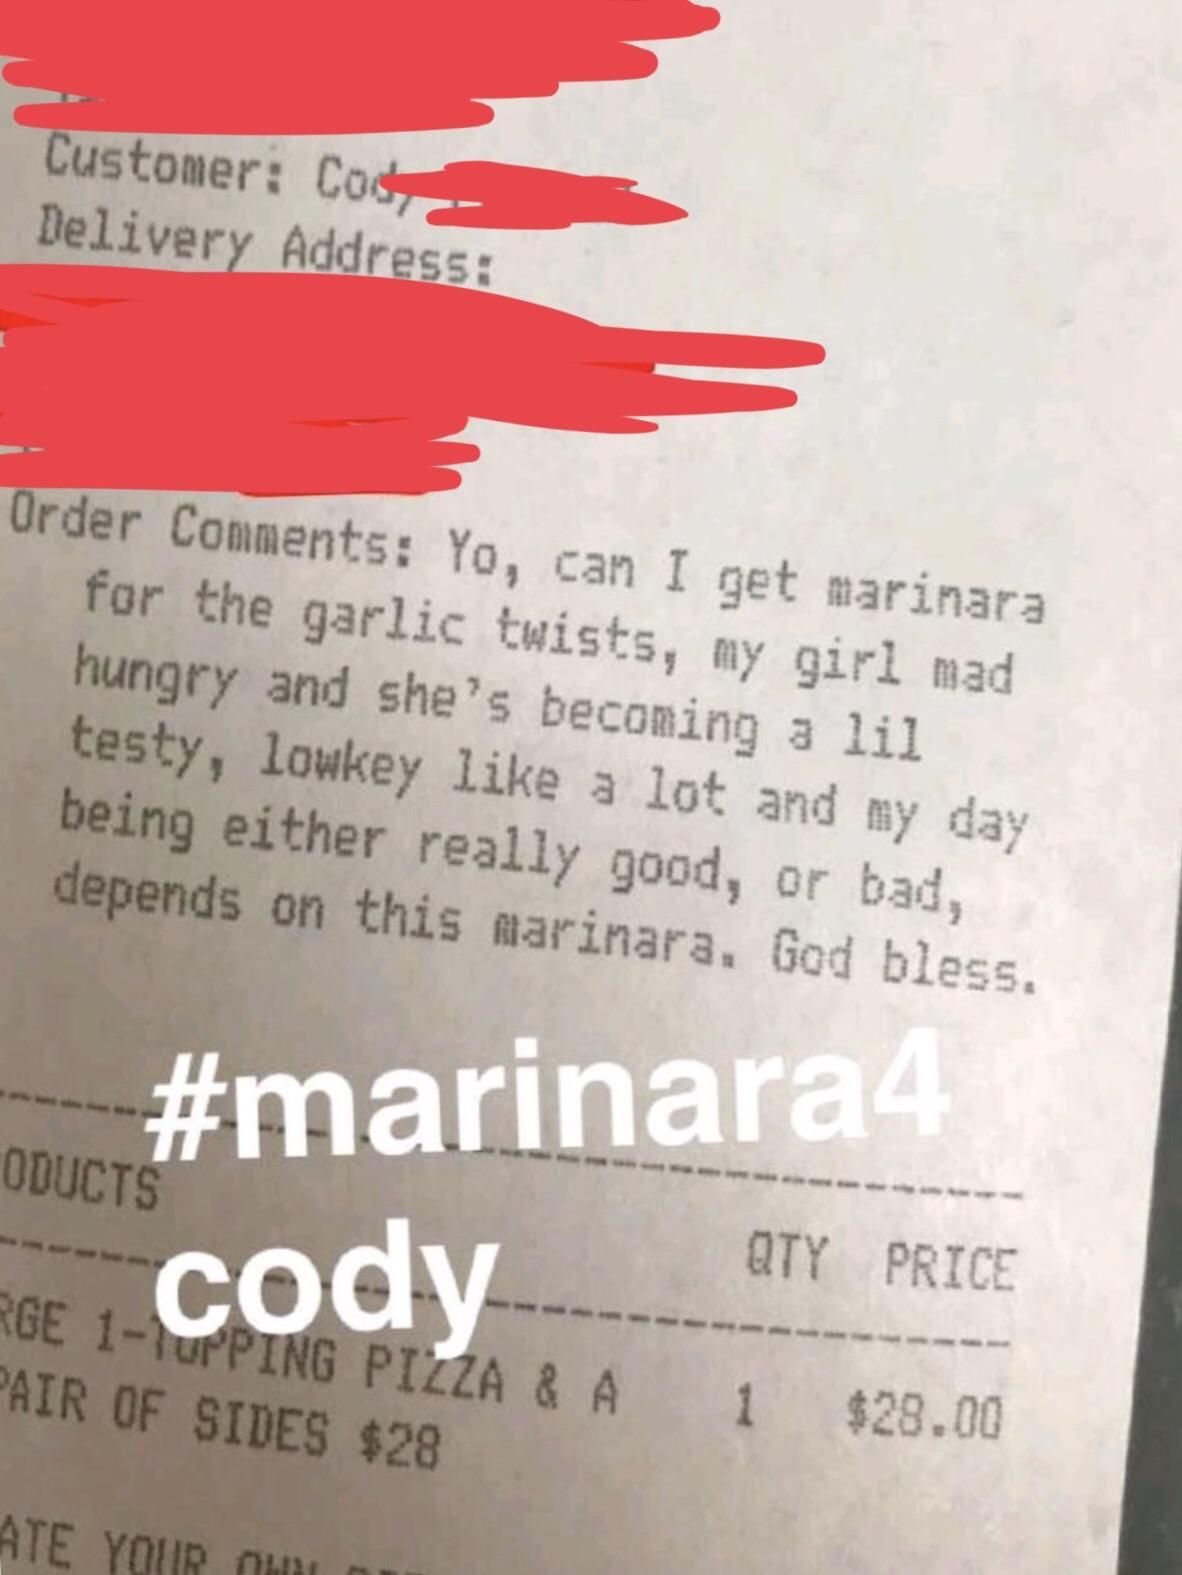 receipt - Customer Costa Delivery Address Order Yo, can I get marinara for the garlic twists, my girl mad hungry and she's becoming a lil testy, lowkey a lot and my day being either really good, or bad, depends on this marinara. God bless. Oducts R6 cody 